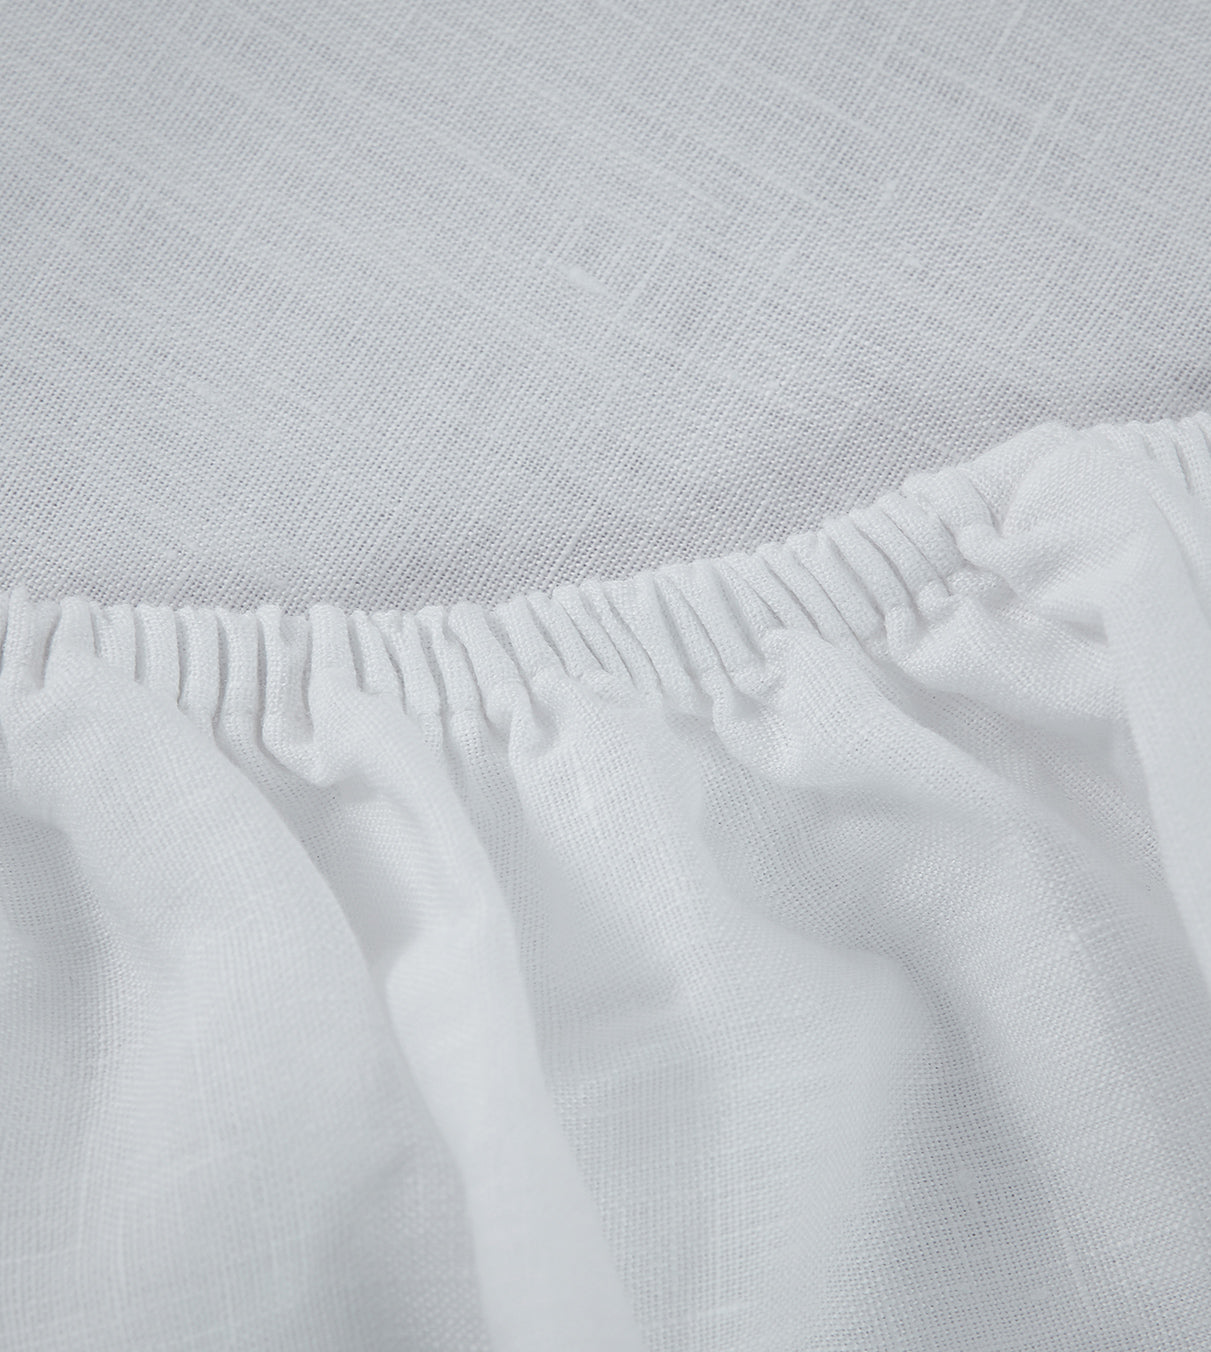 Product: French Linen Sheet Set | Color: Pure White